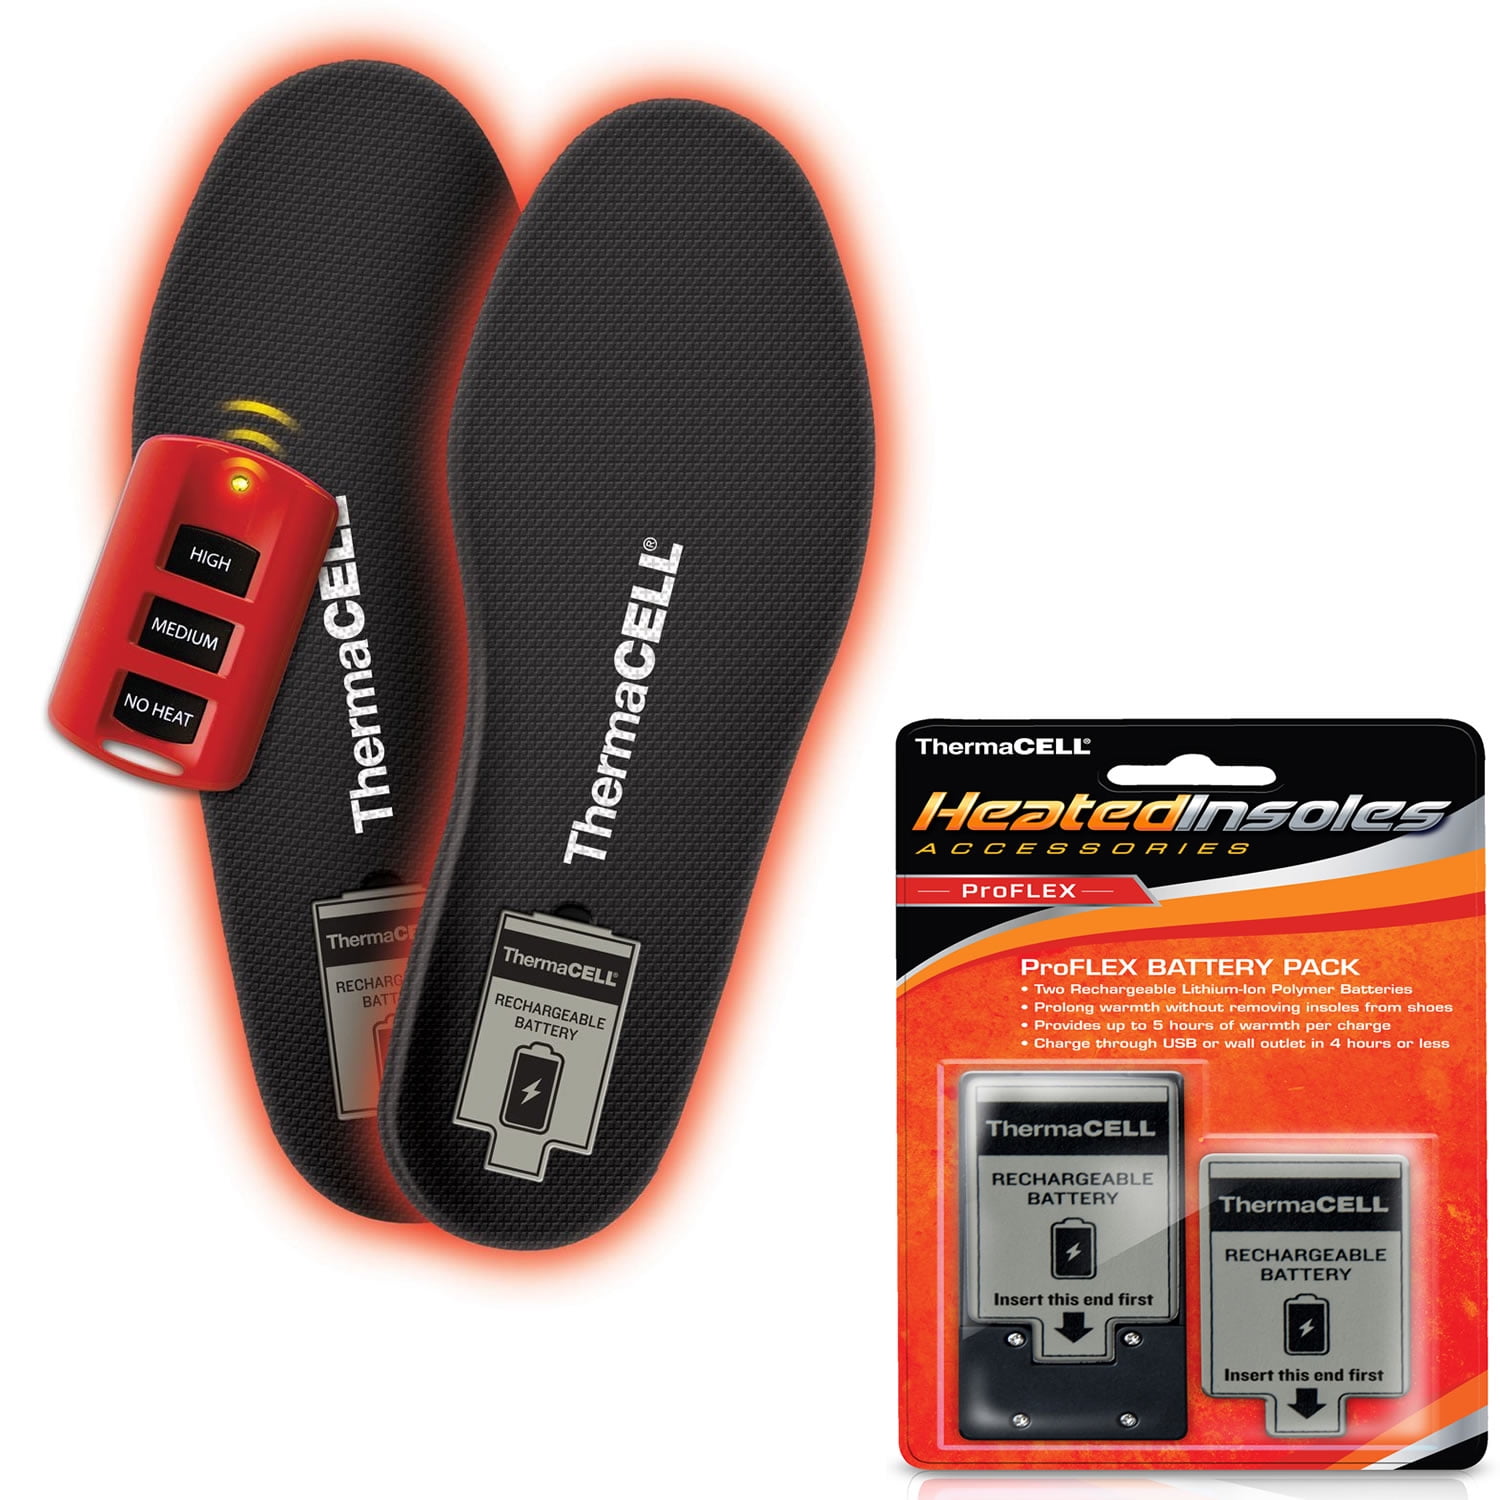 thermacell-proflex-heated-insoles-with-extra-battery-pack-size-medium